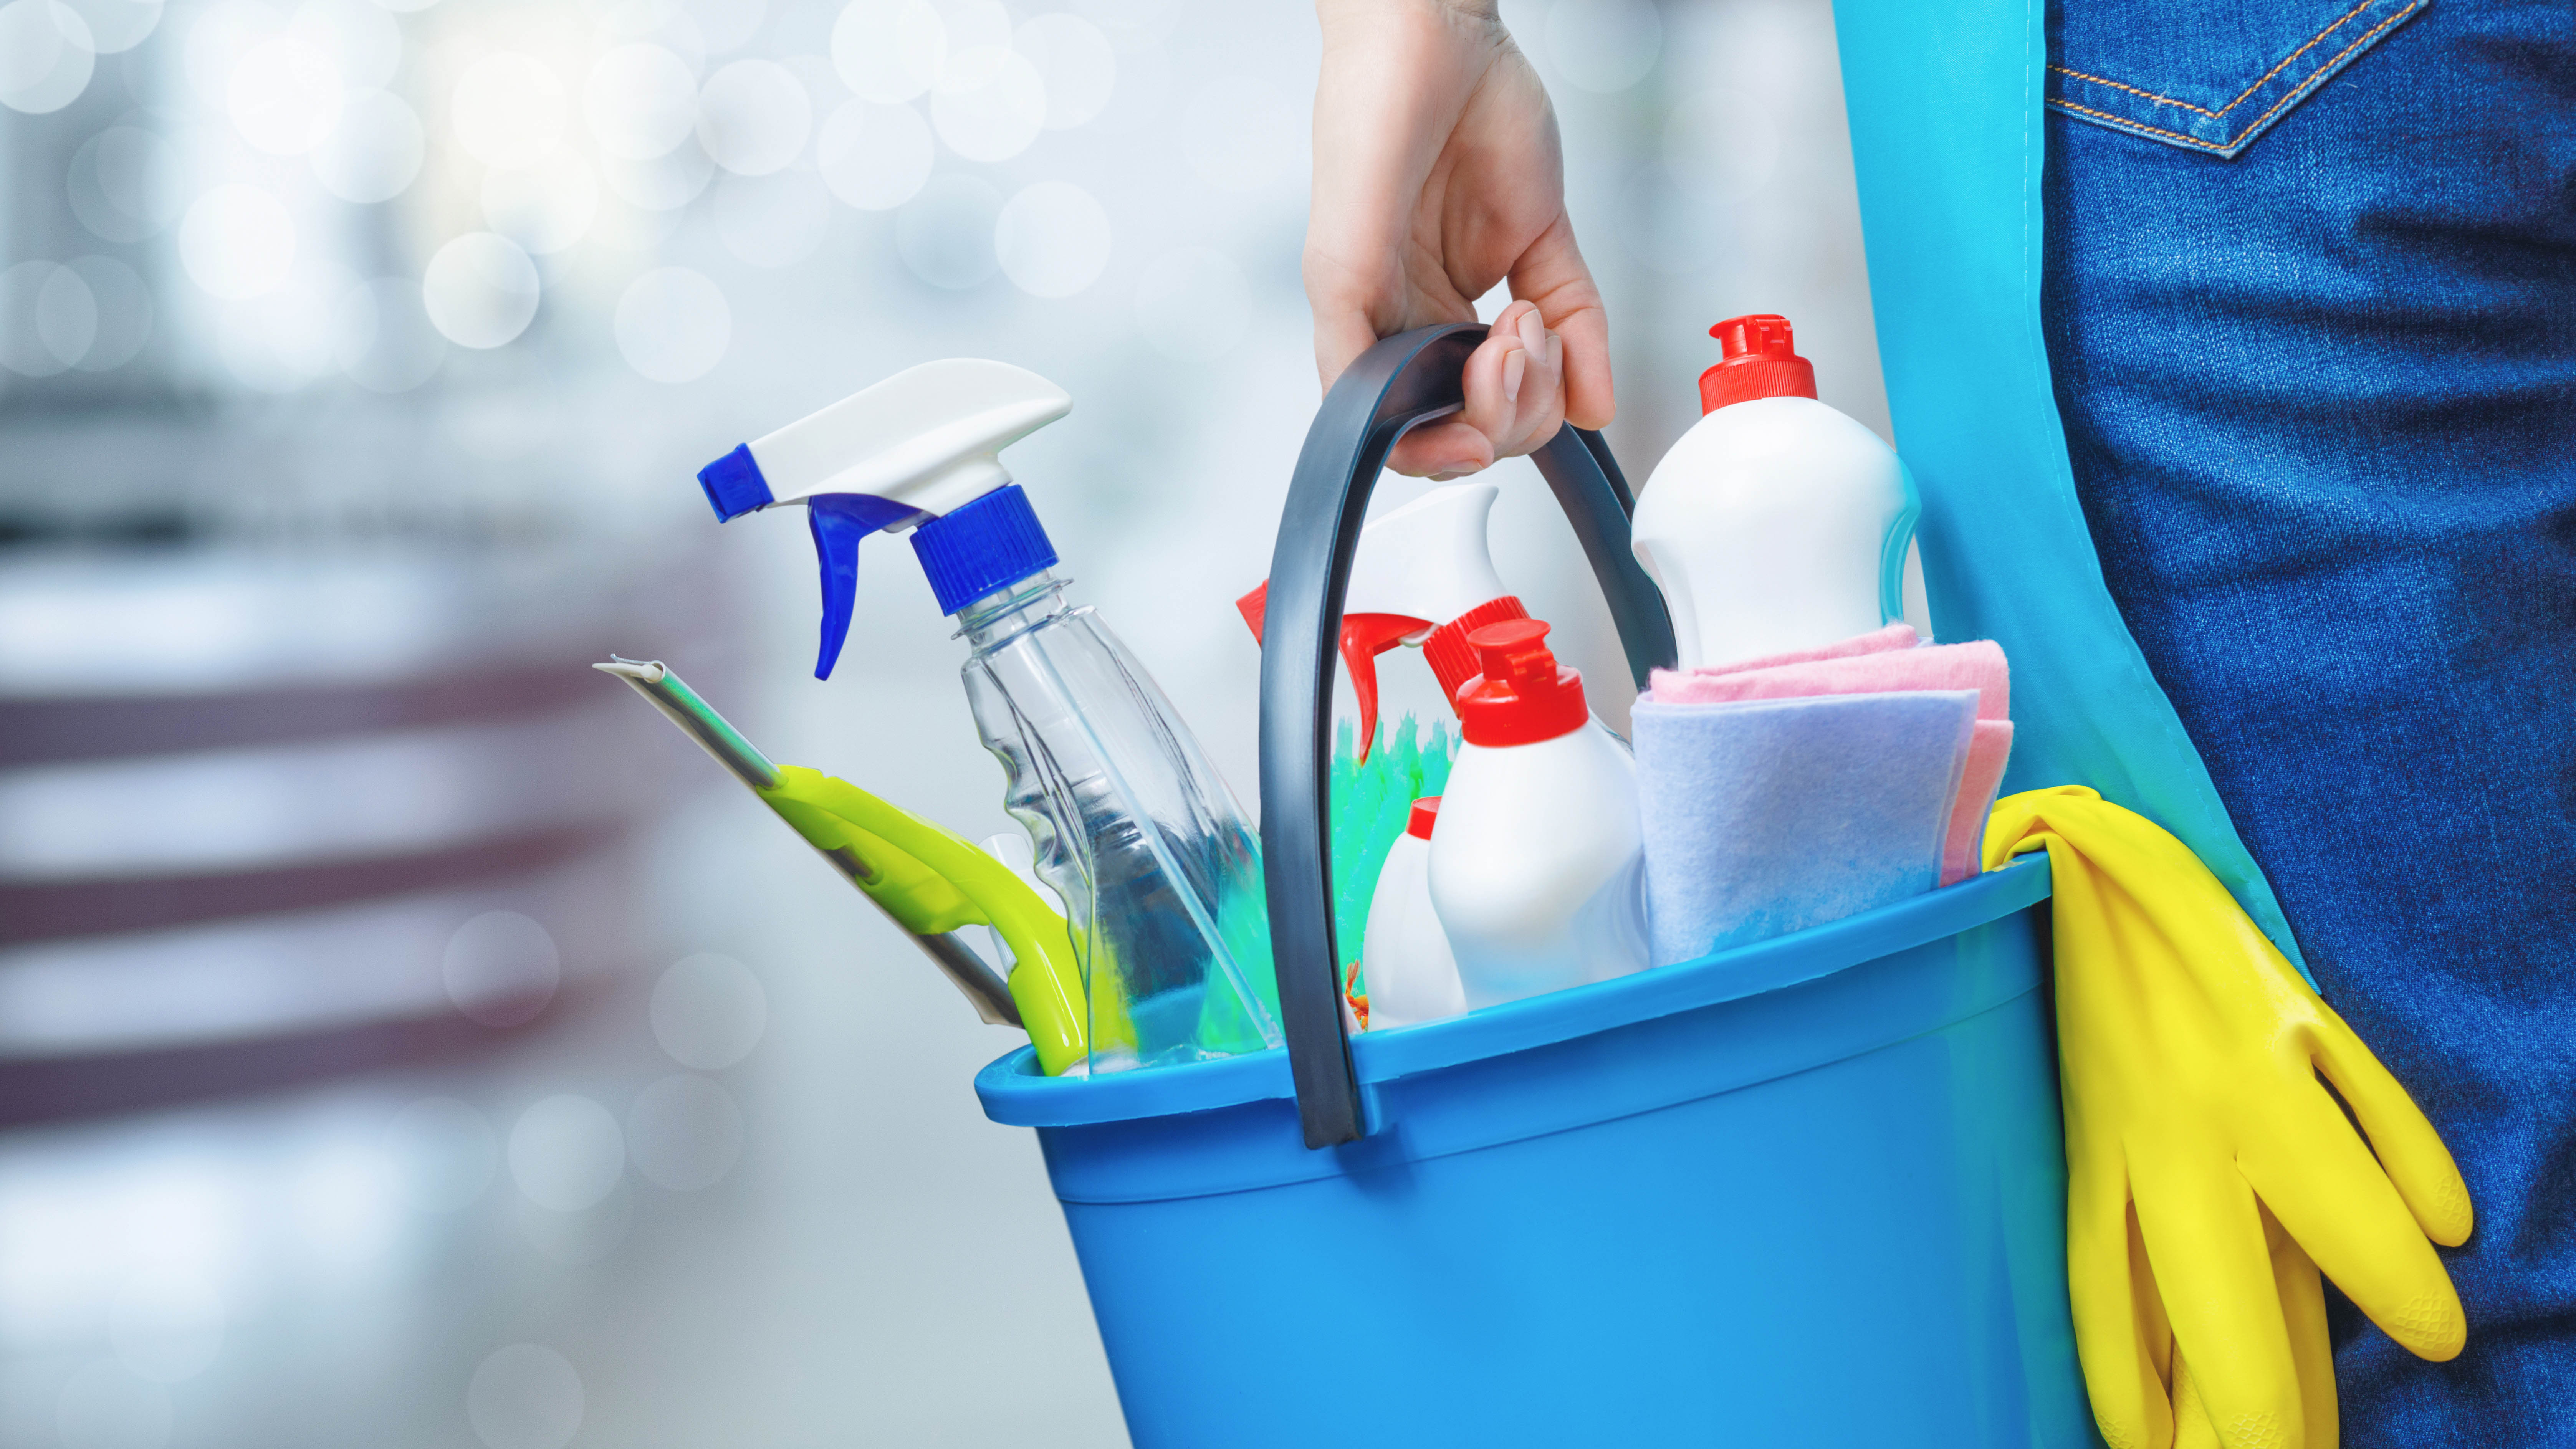 Cleaning equipment being carried in a bucket including a squeegee, cloths and spray bottles